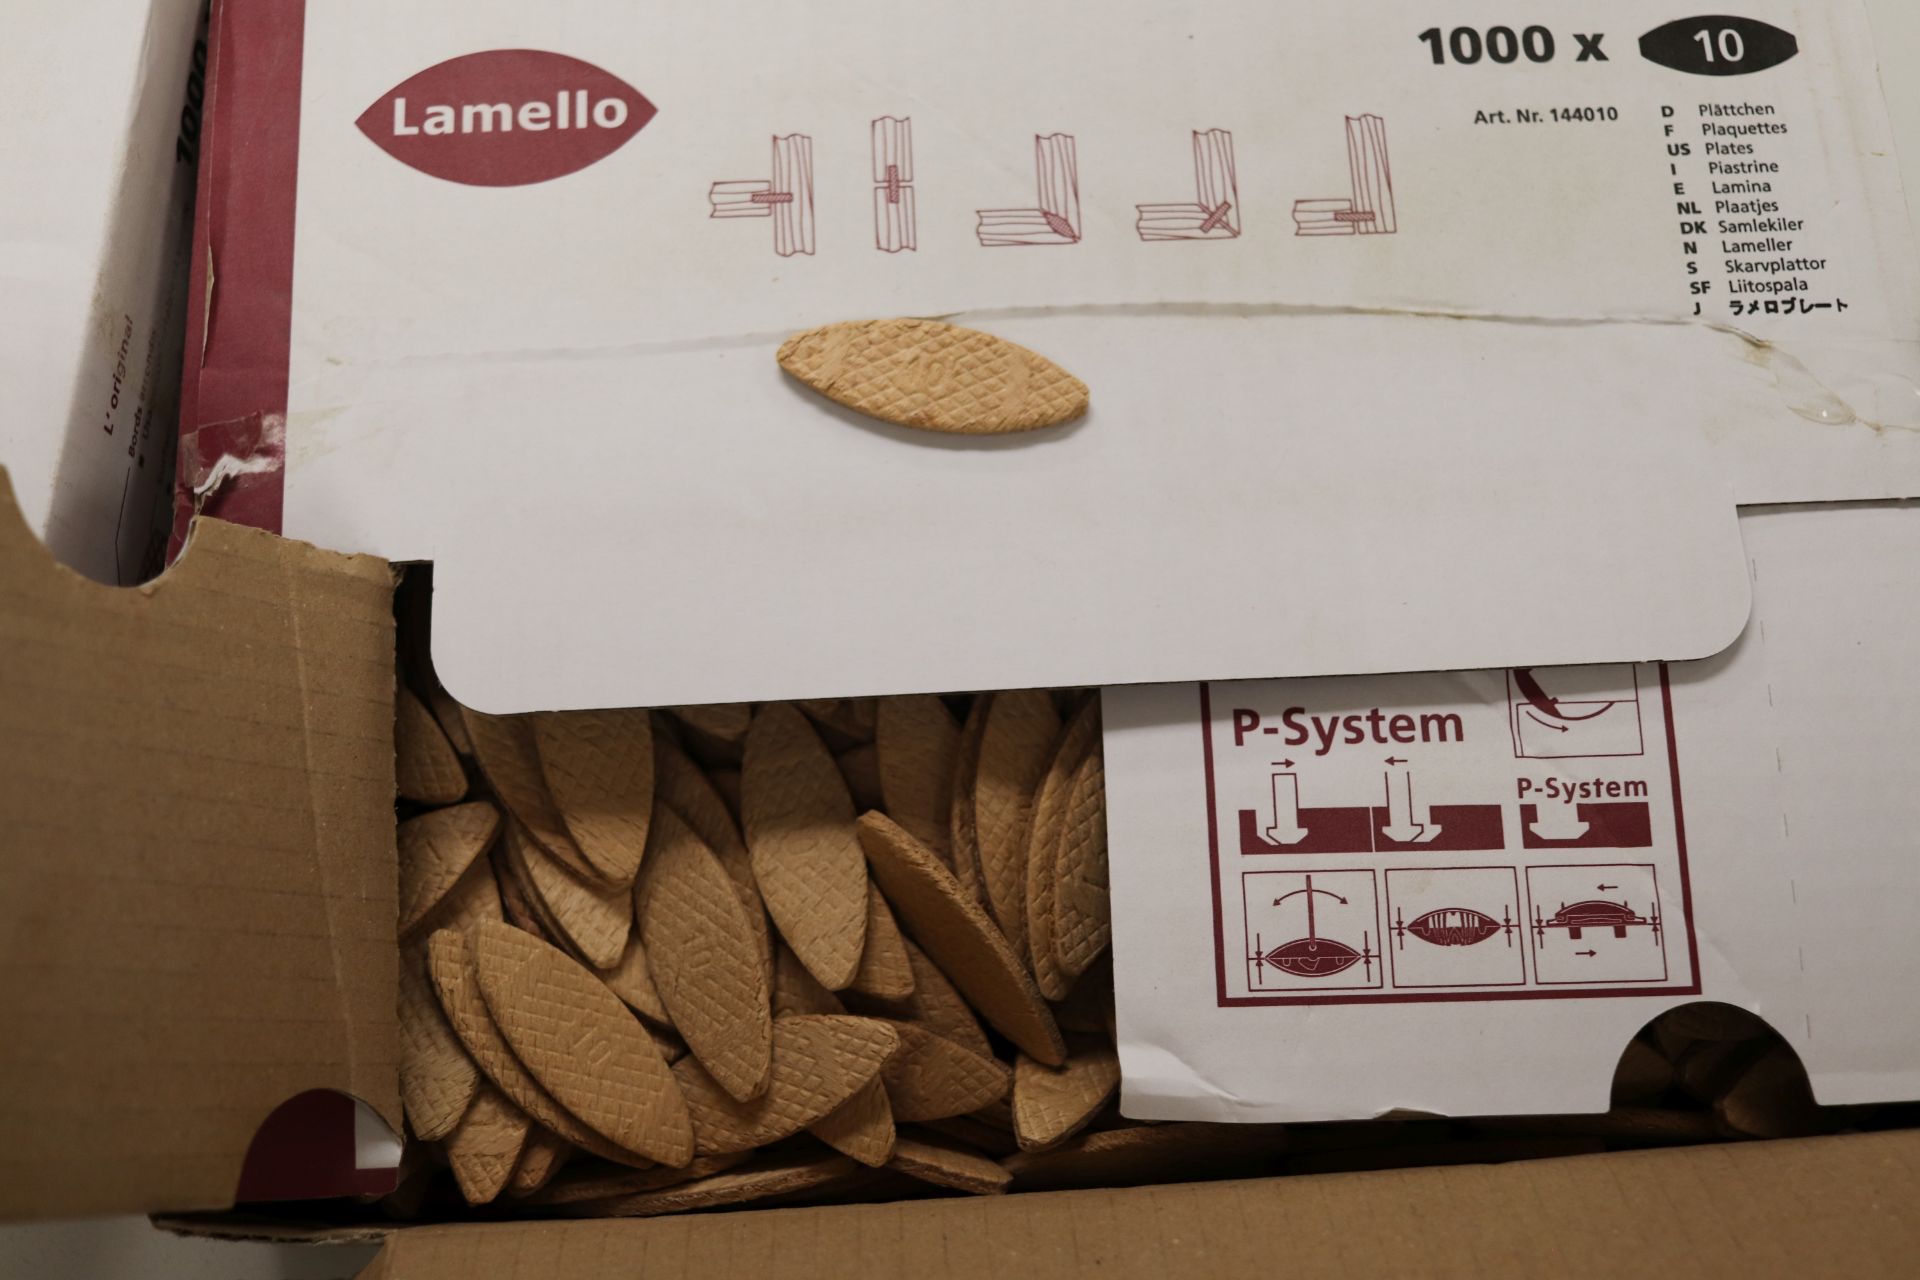 Lamello biscuits - Image 3 of 7